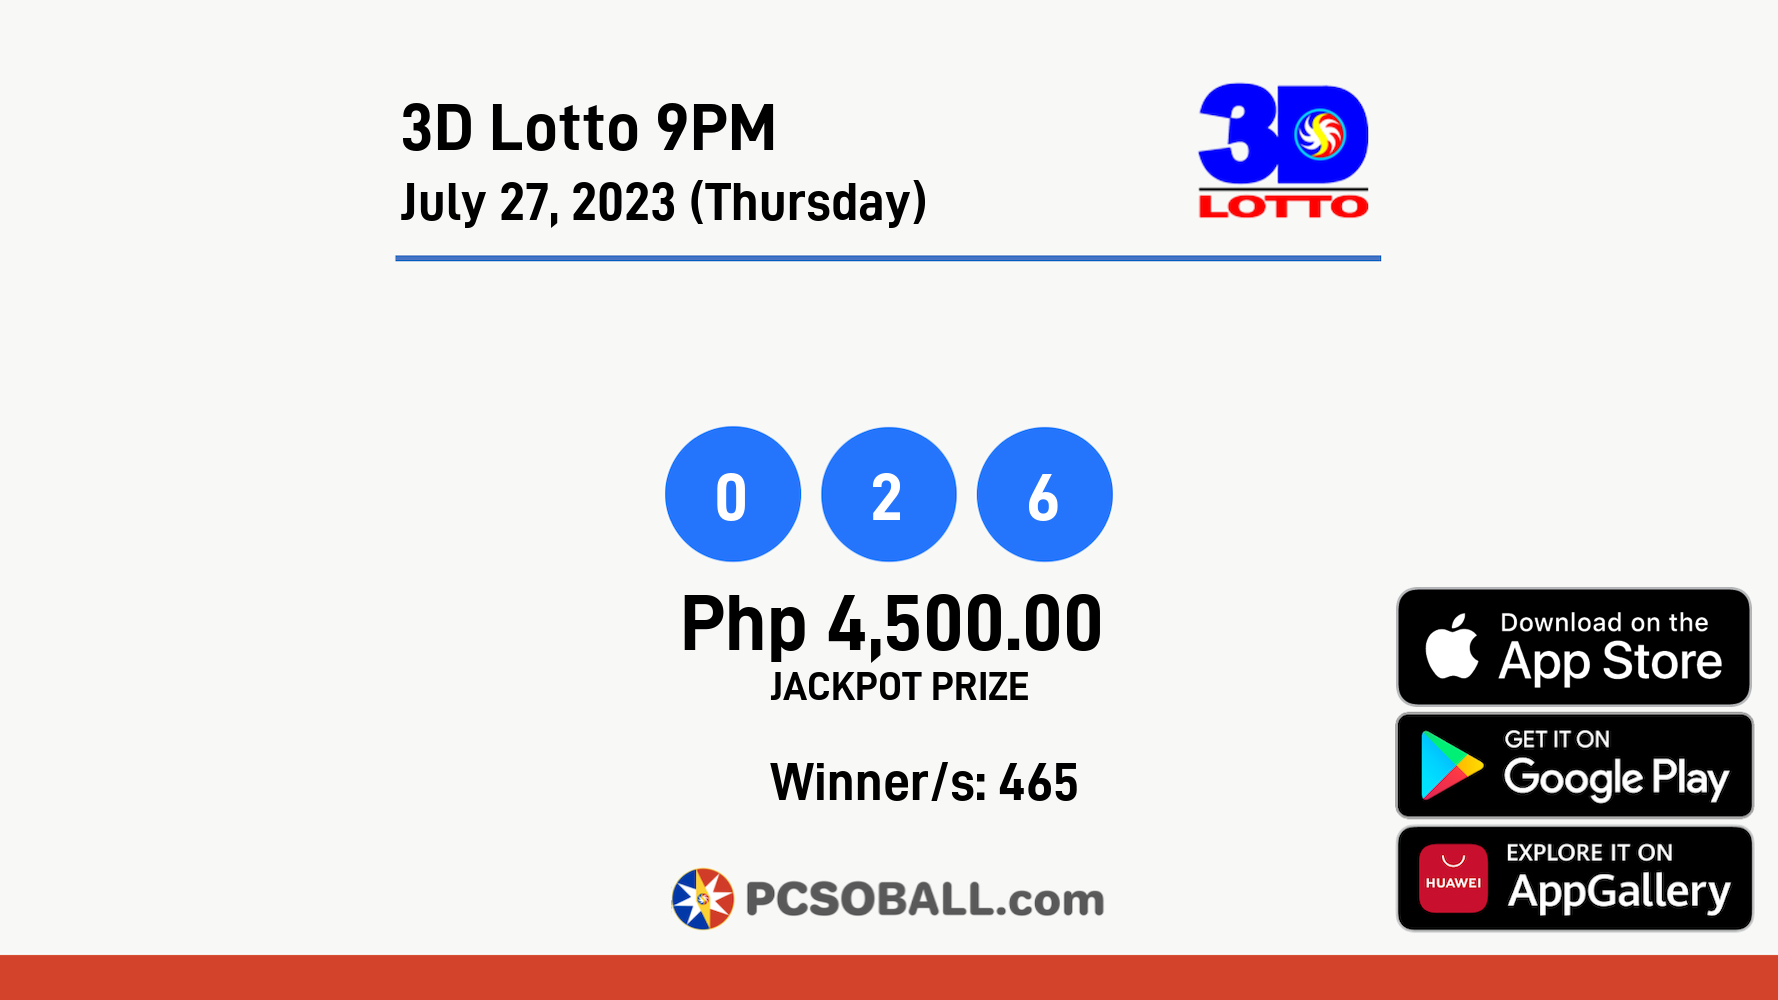 3D Lotto 9PM July 27, 2023 (Thursday) Result